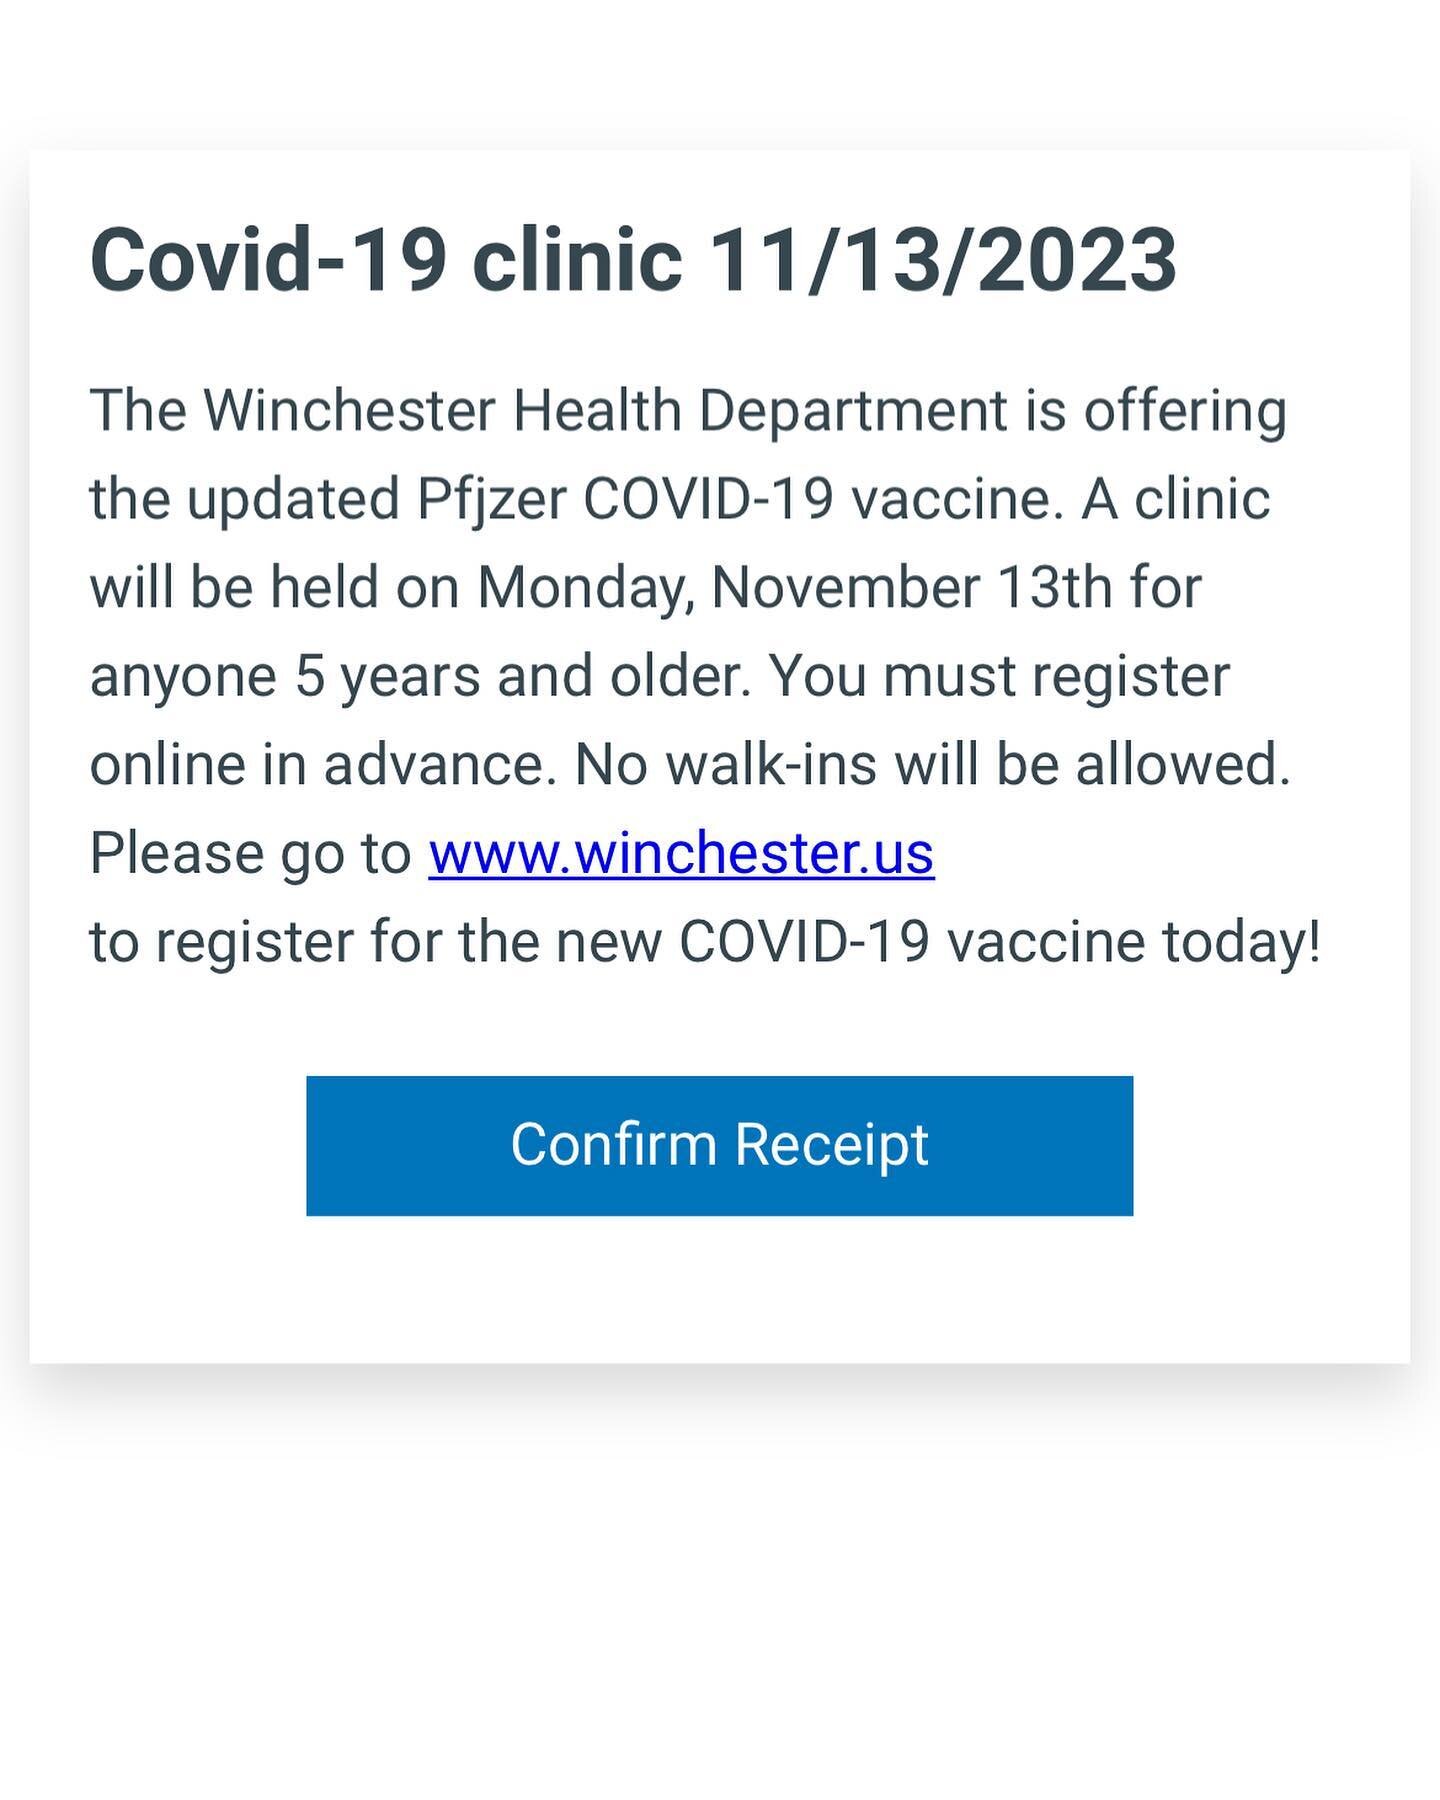 All PSA teachers are up to date on their Covid vaccines. 

http://www.winchester.us/

#covid #strongertogether #buildingacommunity #safeatschool